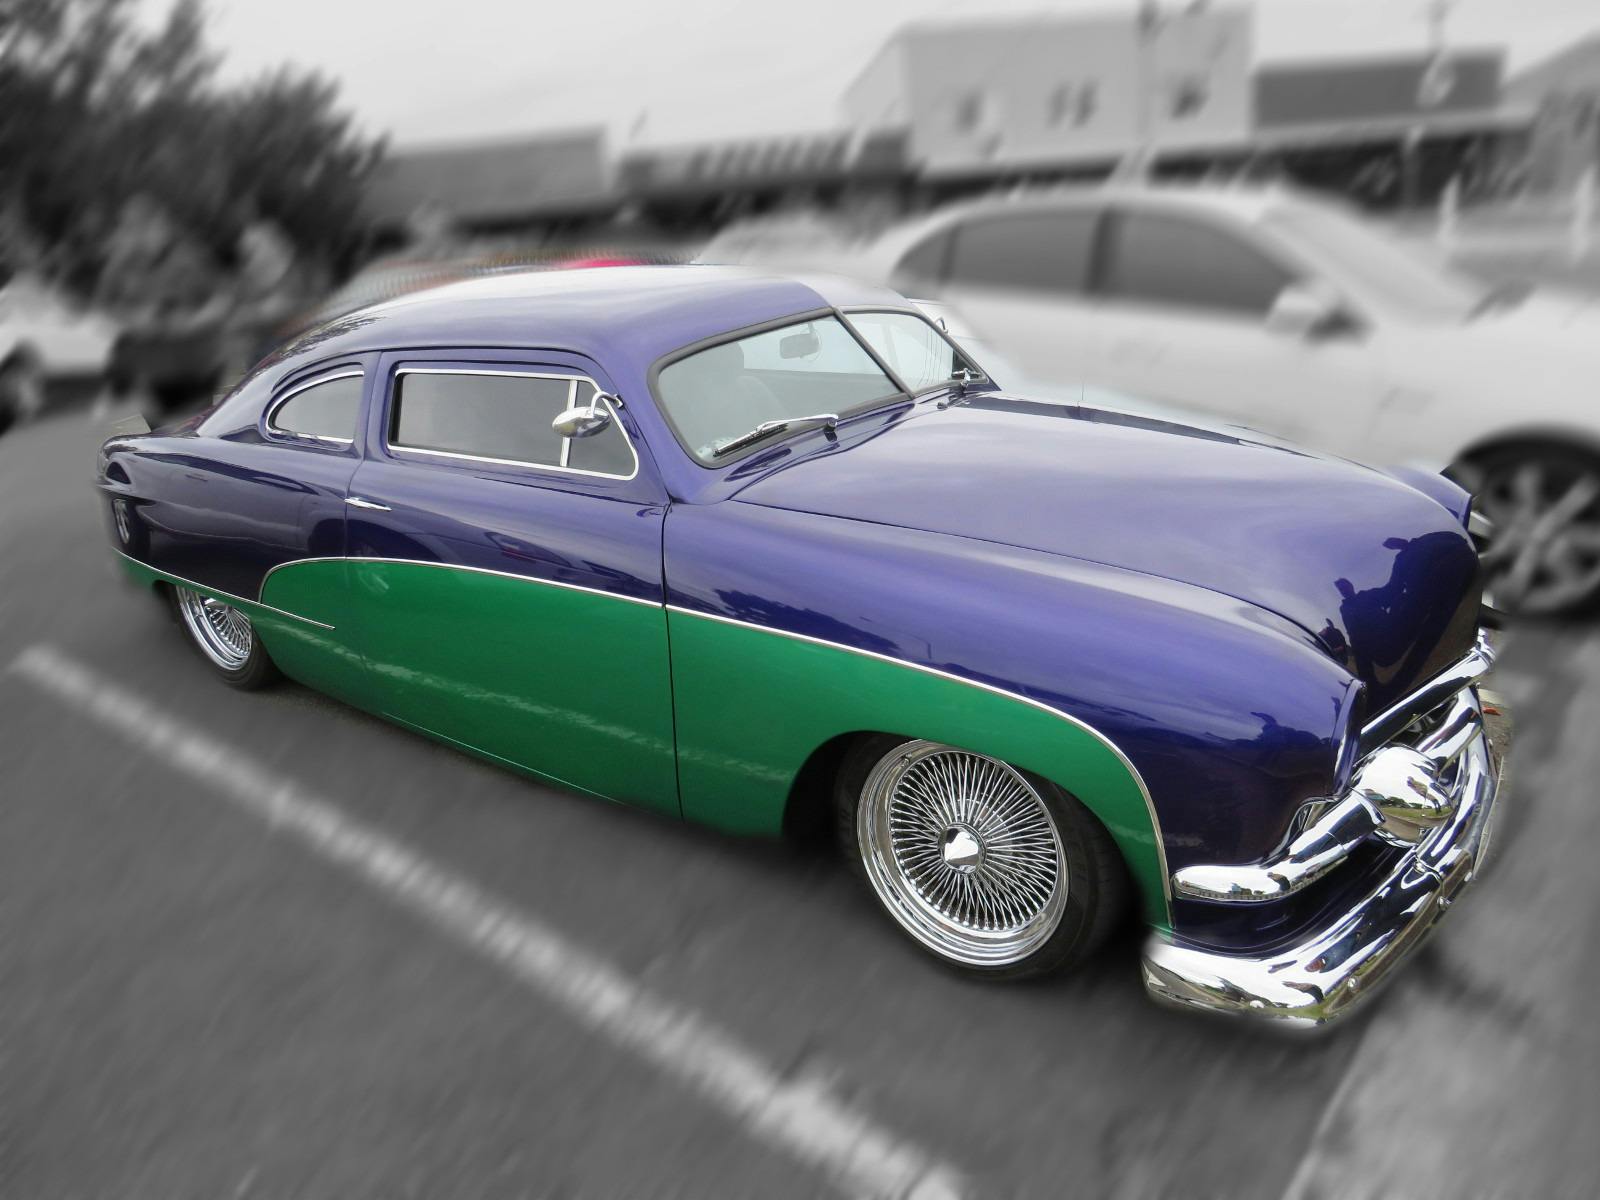 A streamline moderne limo, art deco on wheels in purple and green